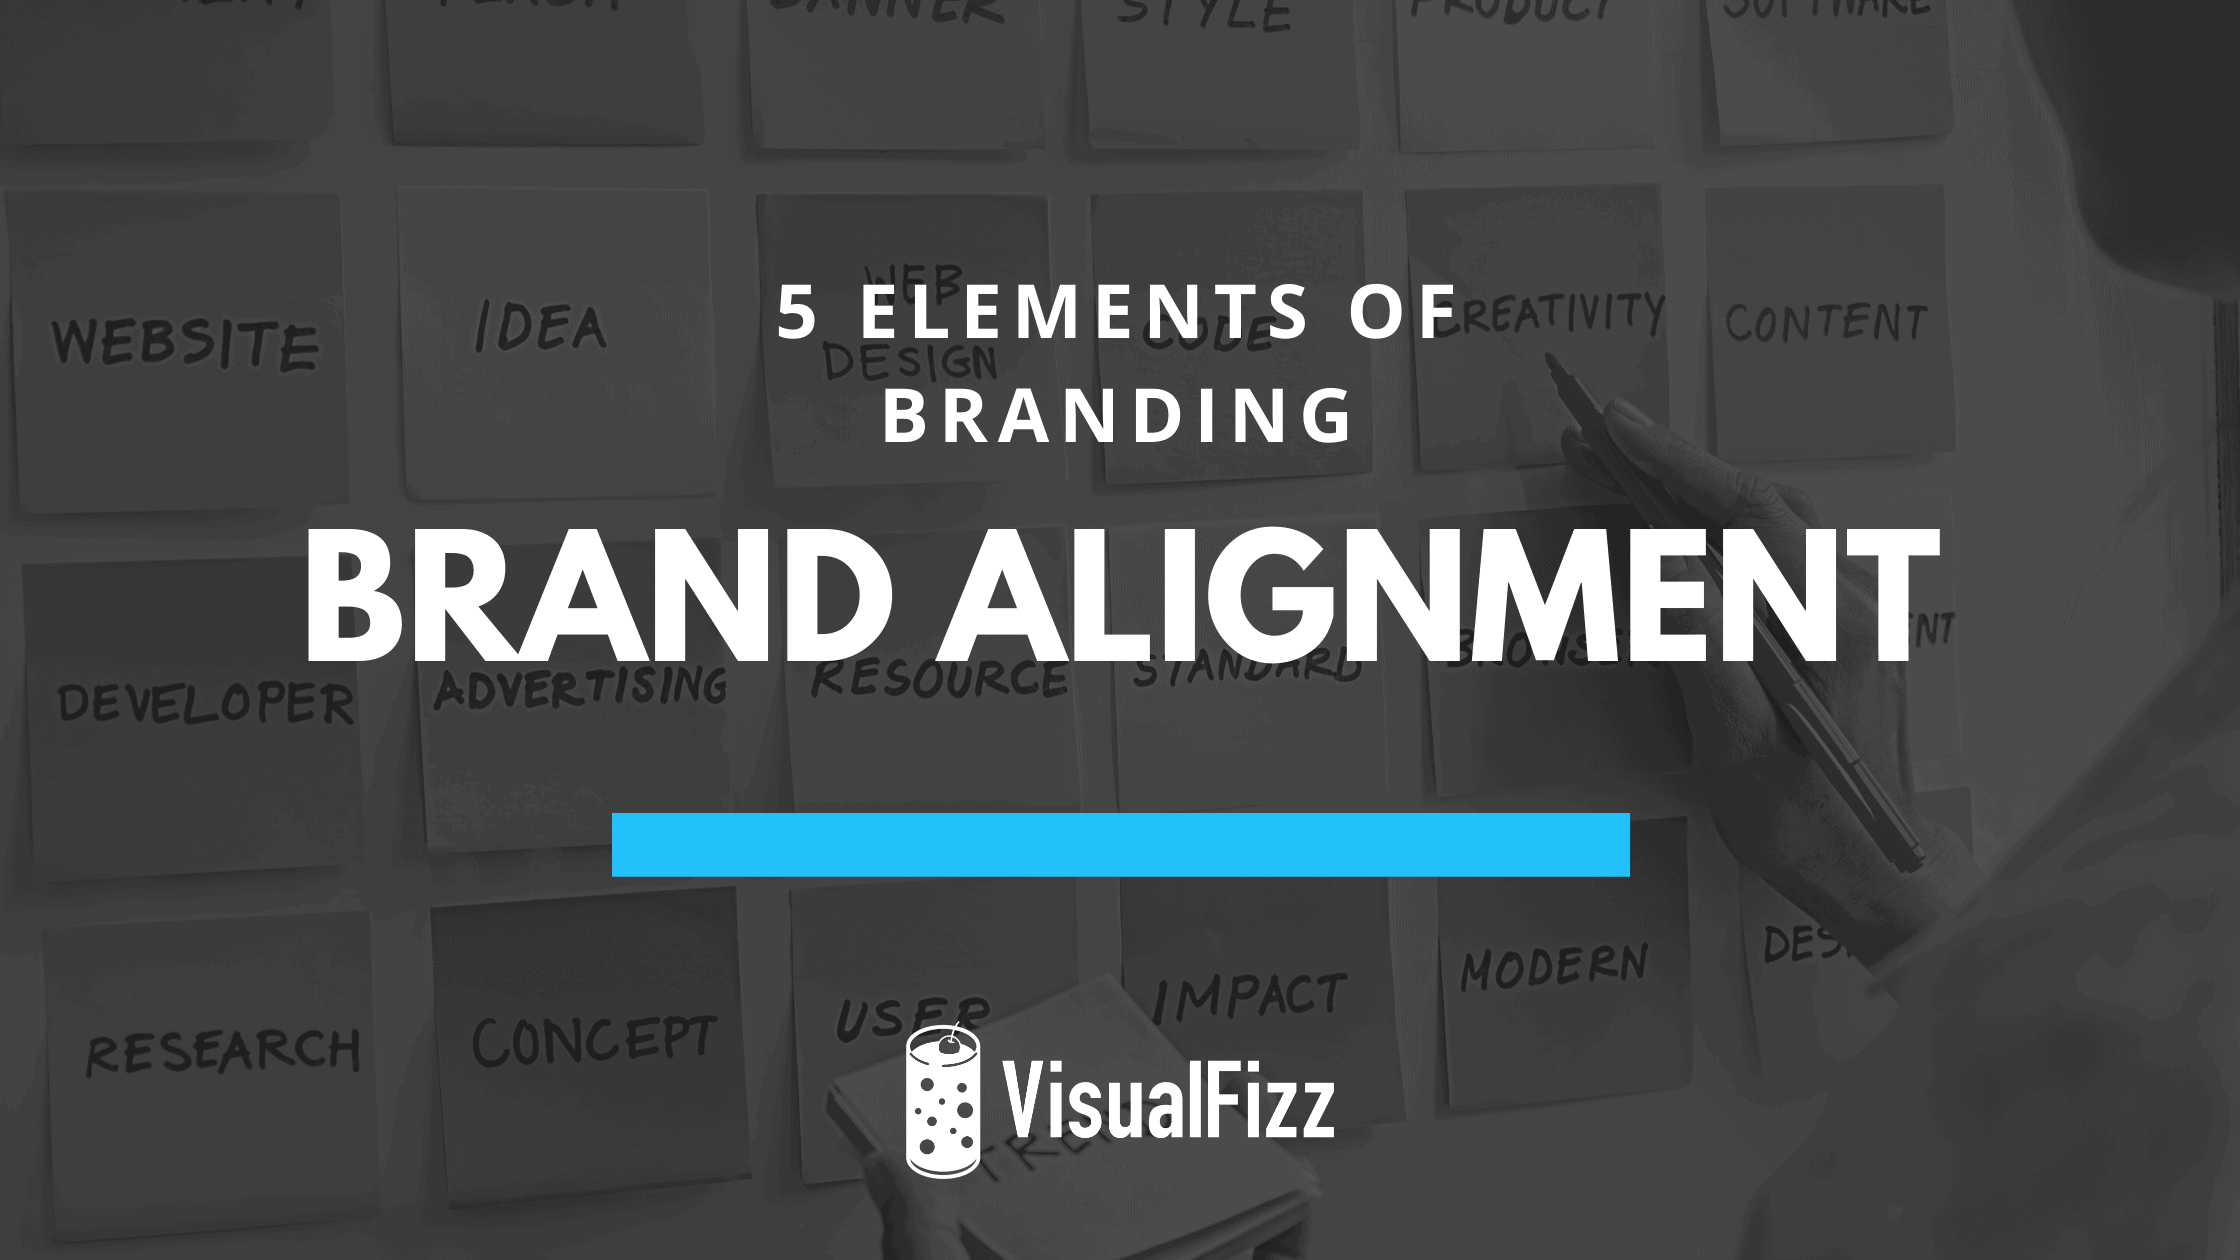 The Key Elements To Building A Successful Brand - Elements Brand